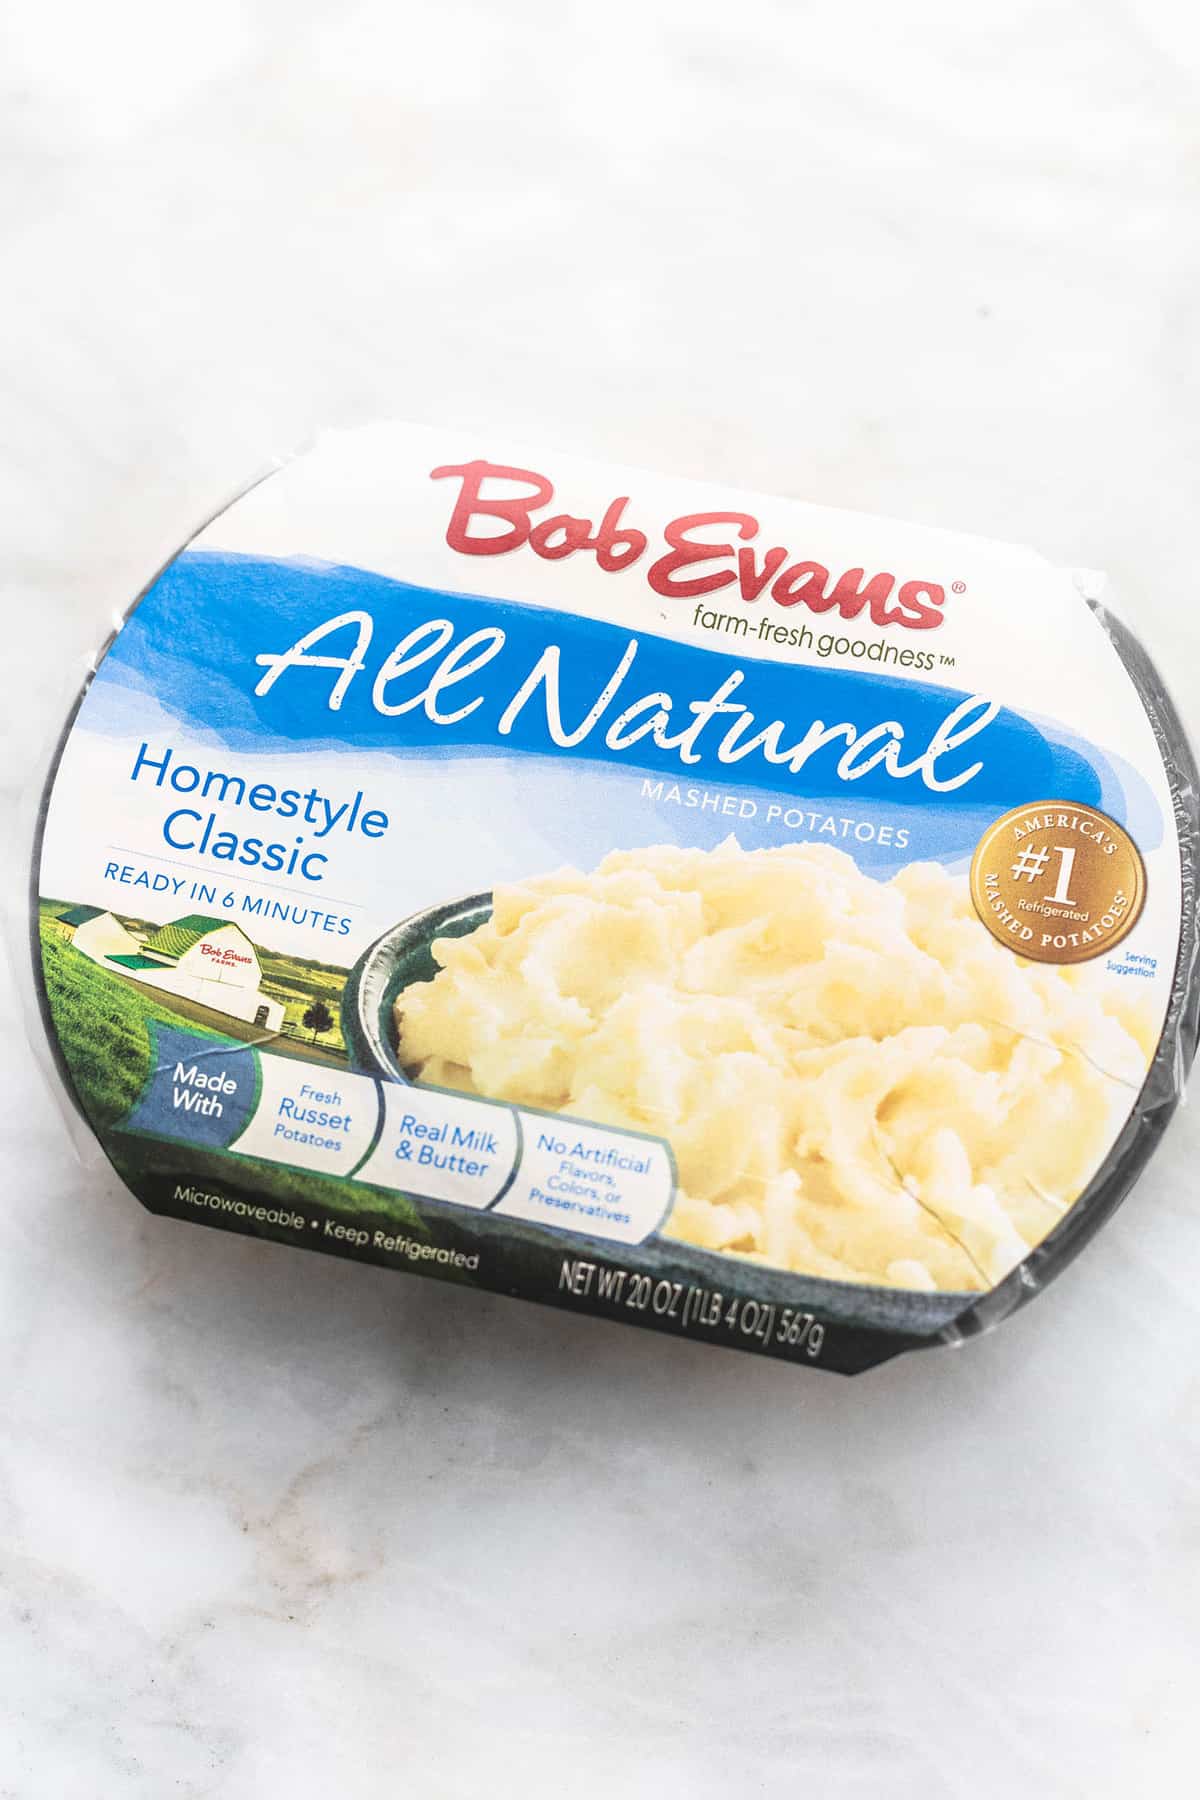 a package of Bob Evans all natural homestyle mashed potatoes.